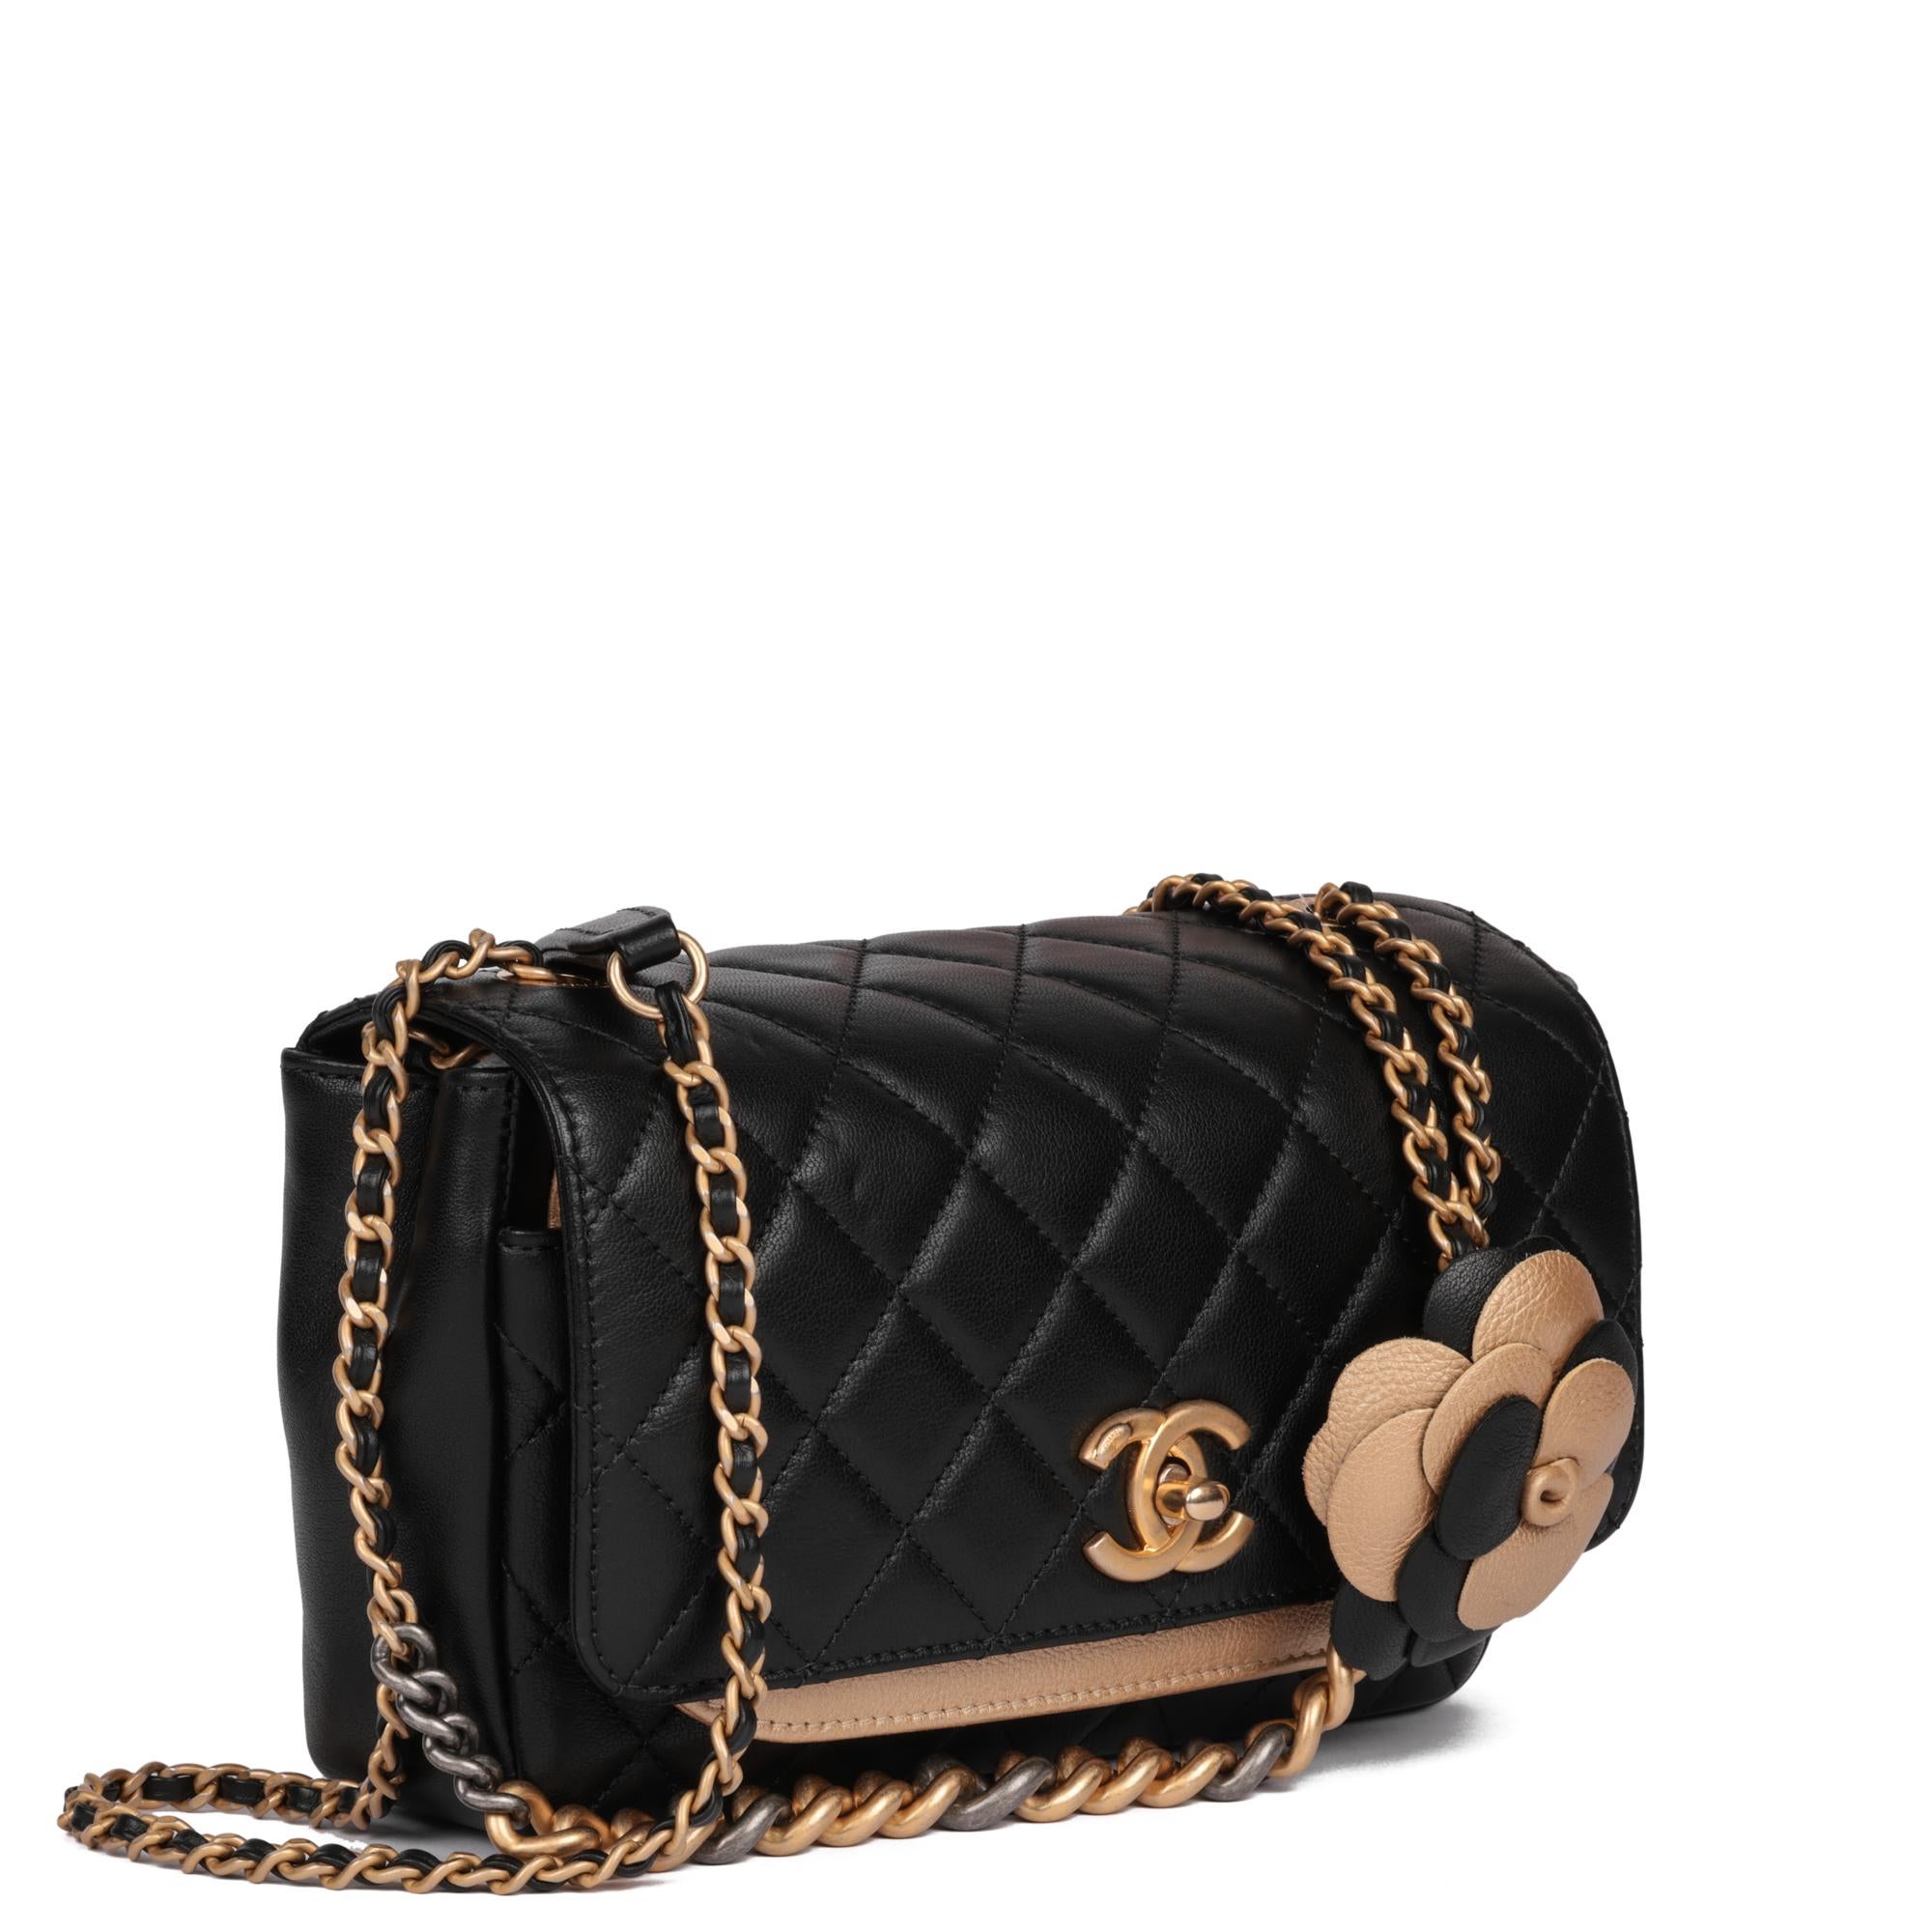 CHANEL
Black Quilted Lambskin & Gold Metallic Lambskin Camellia Mini Flap Bag with Pearl Wallet

Xupes Reference: HB5185
Serial Number: 24411253
Age (Circa): 2017
Accompanied By: Chanel Dust Bag, Authenticity Card, Care Booklet, Box
Authenticity